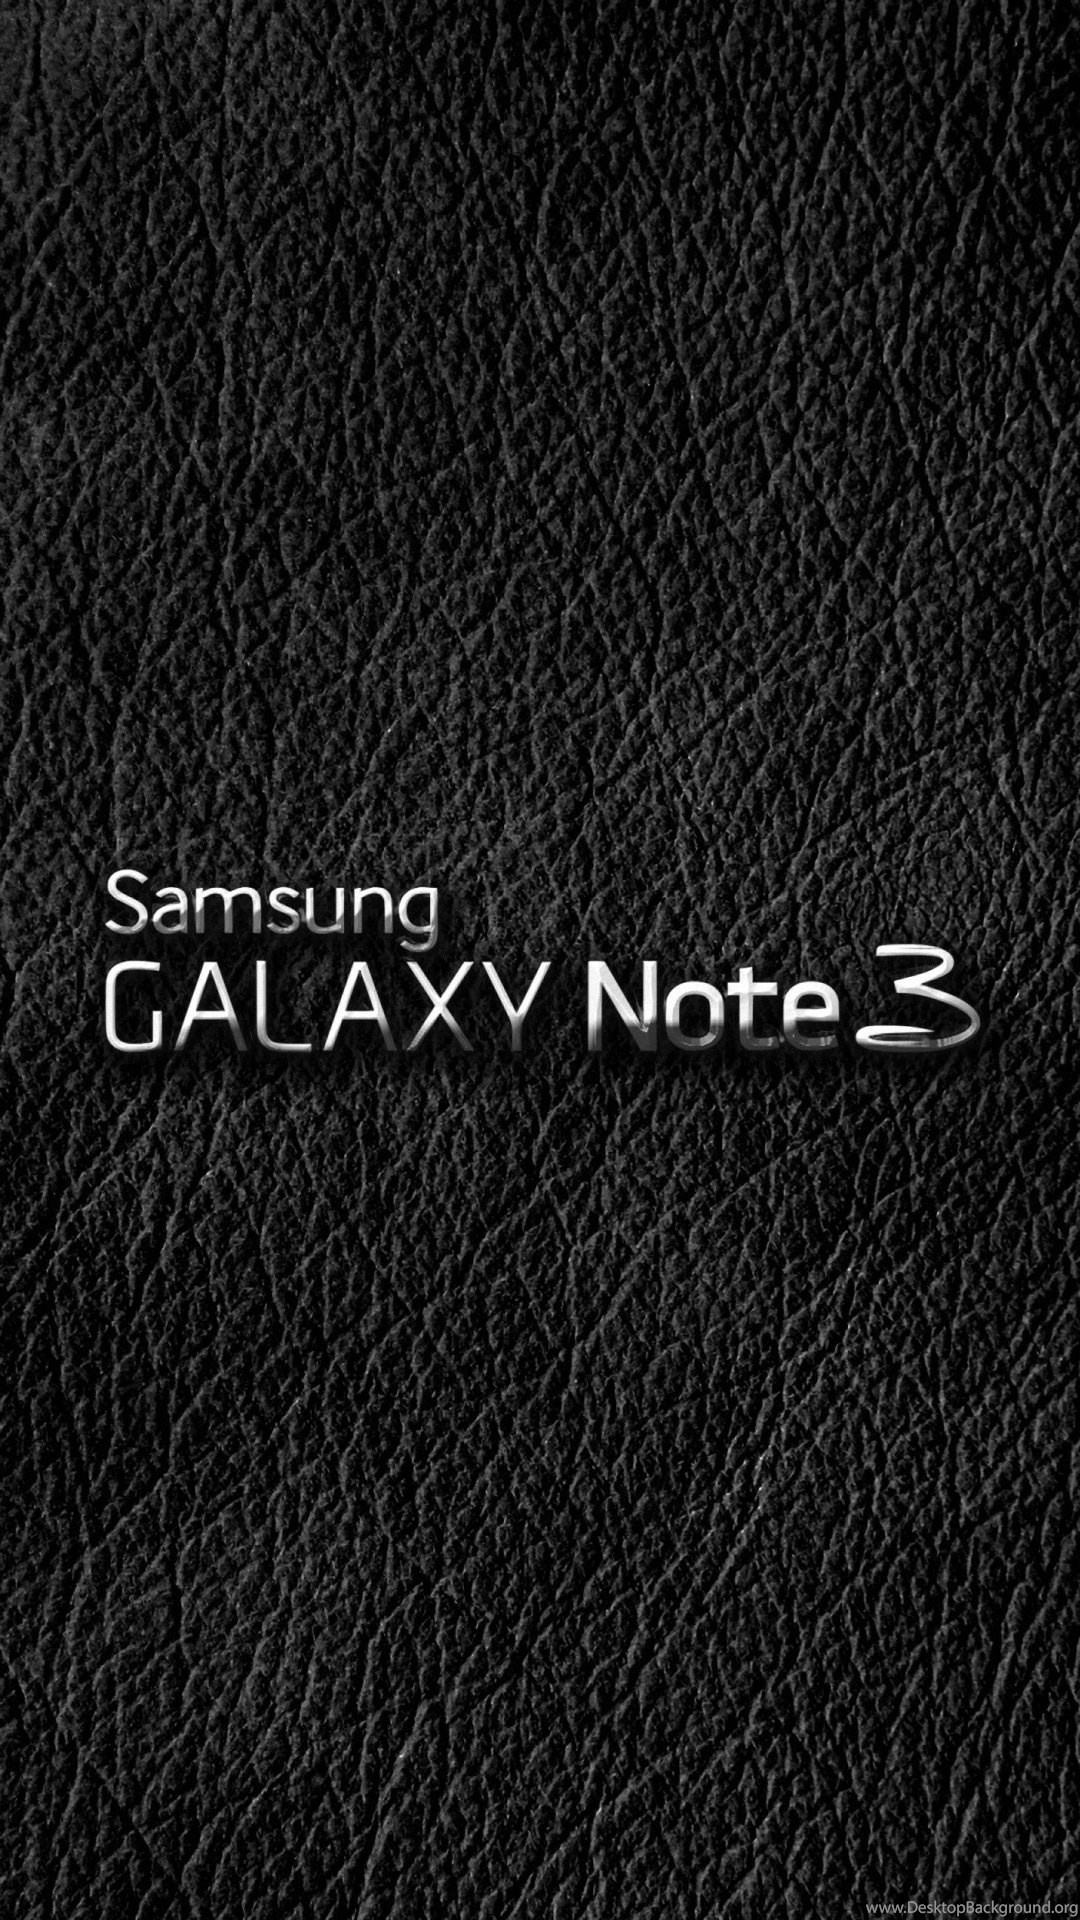 Black Leather Note 3 Lg Phone Wallpapers Hd 1080x1920 Desktop Background